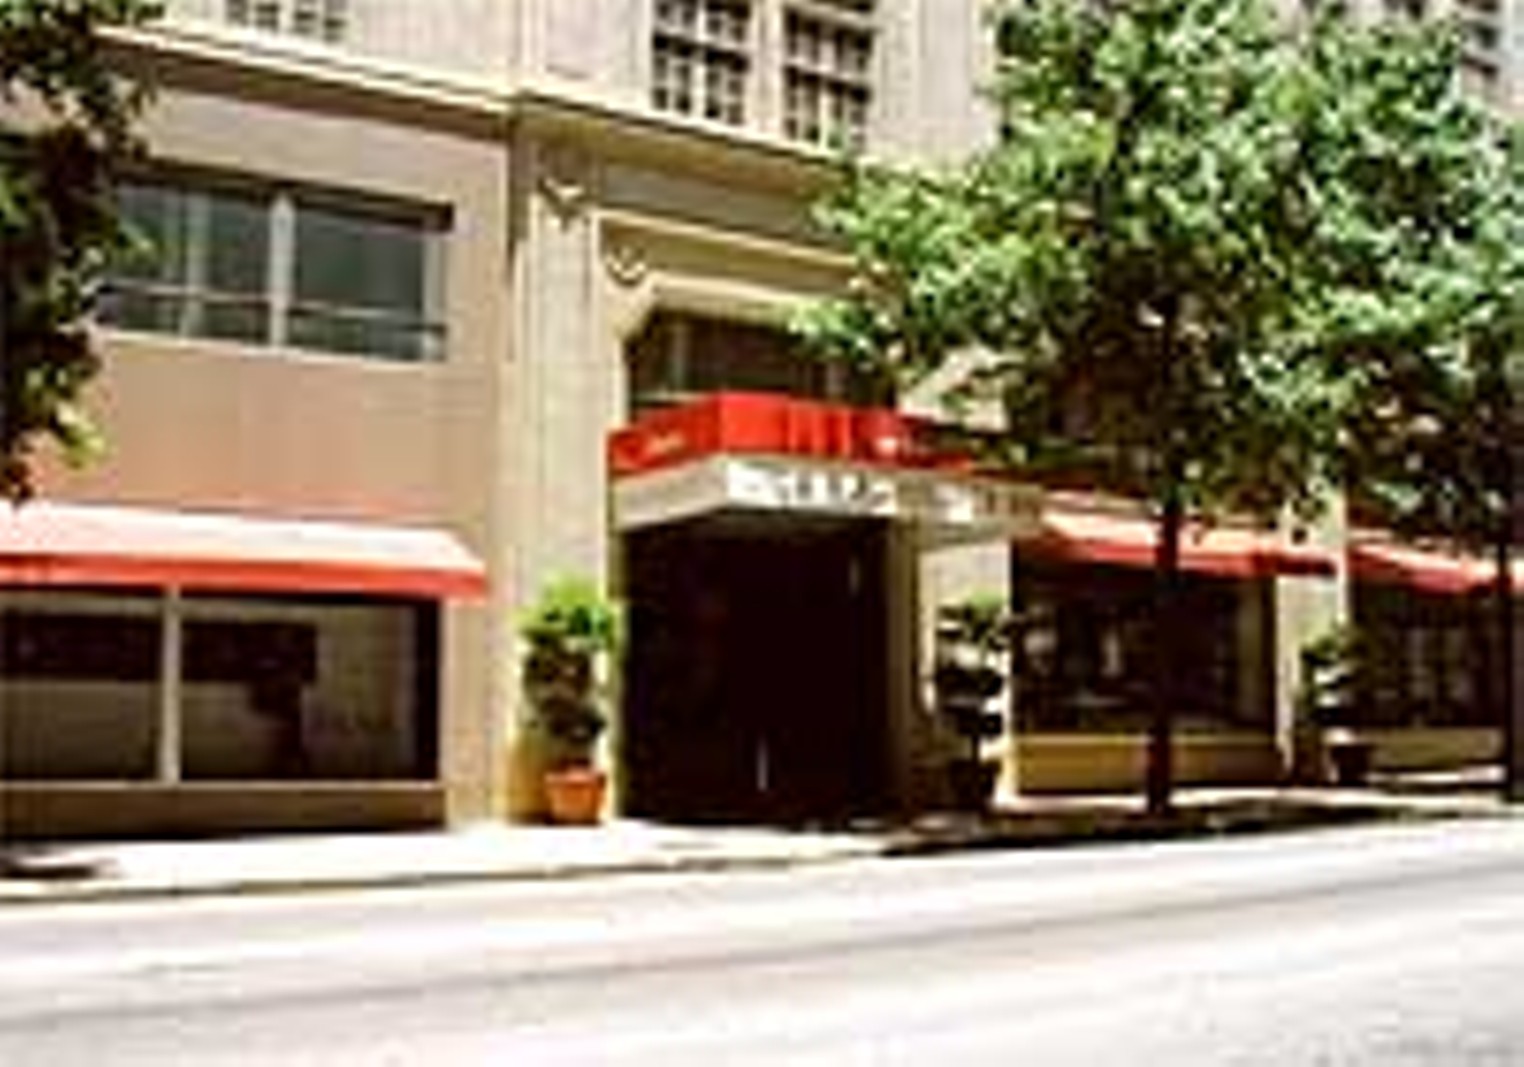 Best Place to Suit Shop During a Weekday 2004, Neiman Marcus, Best of  Dallas® 2020, Best Restaurants, Bars, Clubs, Music and Stores in Dallas